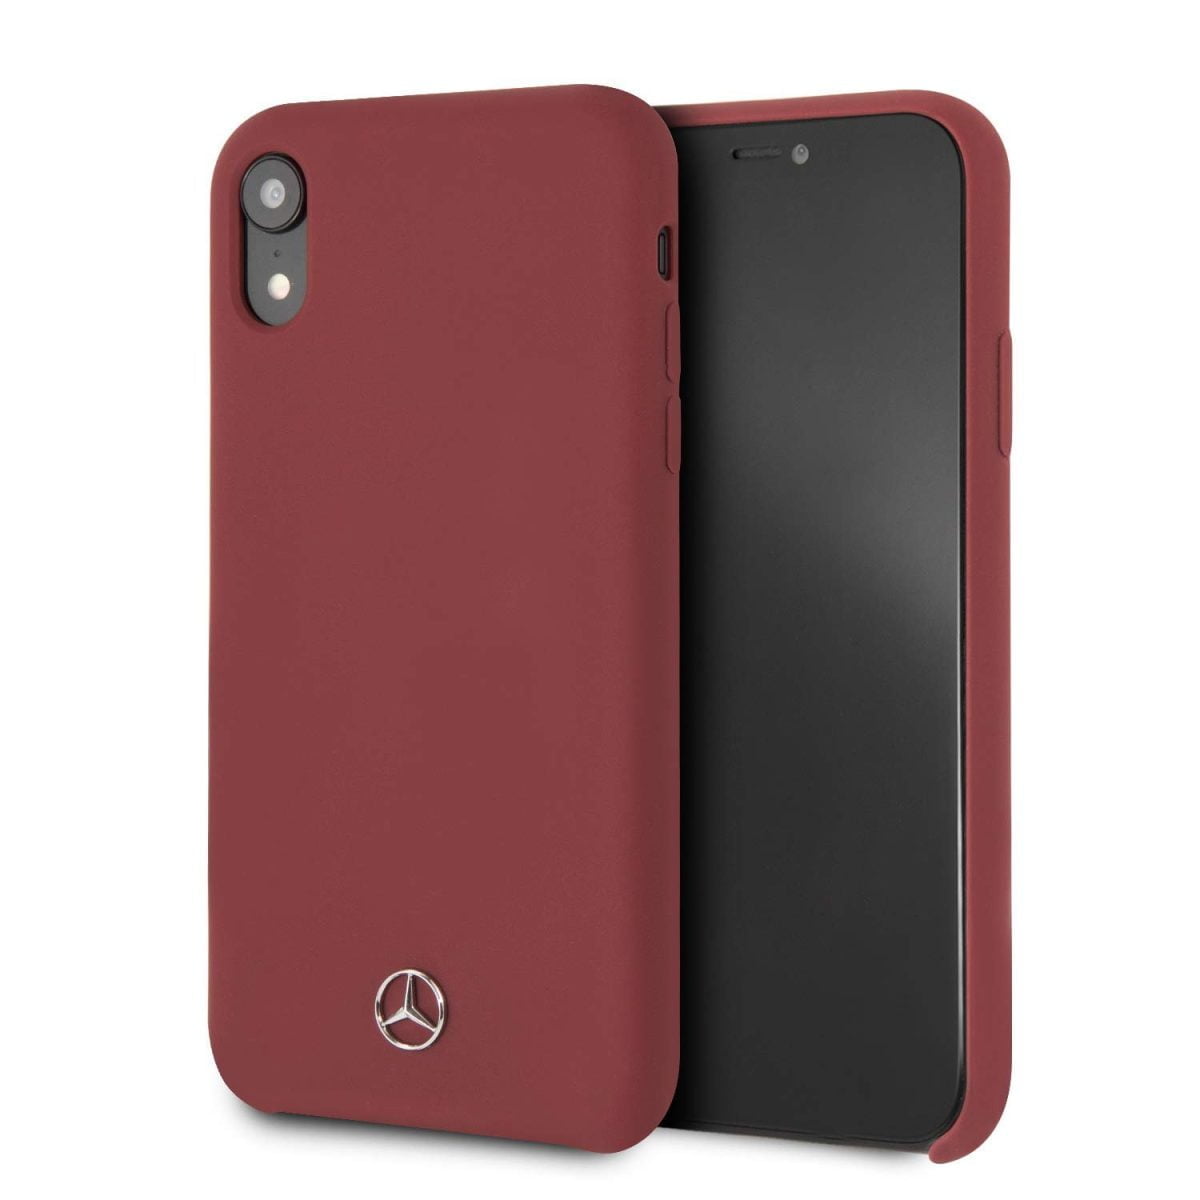 Mercedes Benz Iphone Xr Liquid Silicone Case With Microfiber Lining Red Drop Protection Easily Accessible Ports Officially Licensed 01 &Amp;Lt;H1&Amp;Gt;Iphone Xs Max Liquid Silicone Case With Microfiber Lining Red (Mercedes-Benz)&Amp;Lt;/H1&Amp;Gt; &Amp;Lt;Span Class=&Amp;Quot;Y2Iqfc&Amp;Quot; Lang=&Amp;Quot;En&Amp;Quot;&Amp;Gt;Mercedes-Benz Pattern Ii Series. The Minimalist And Captivating Aesthetics Of Mercedes-Benz Interior Design Have Been Transferred Silicon. They Guarantee A Unique Look And Safety For Your Phone. - Leather Case With A Metallic Mercedes-Benz Logo Has A 3D Effect - The Unique Finish Enhances The Look And Quality Of This Case - Designed With Easy Access To Ports And Buttons - Case Compatible With Wireless Chargers Collection: Pattern Line Twister Type: Hardcase Material:silicon Red  Compatibility: Iphone X / Xs Product Manufactured Under License From Mercedes-Benz.&Amp;Lt;/Span&Amp;Gt; Iphone Cases Iphone Xs Max Liquid Silicone Case With Microfiber Lining Red (Mercedes-Benz)